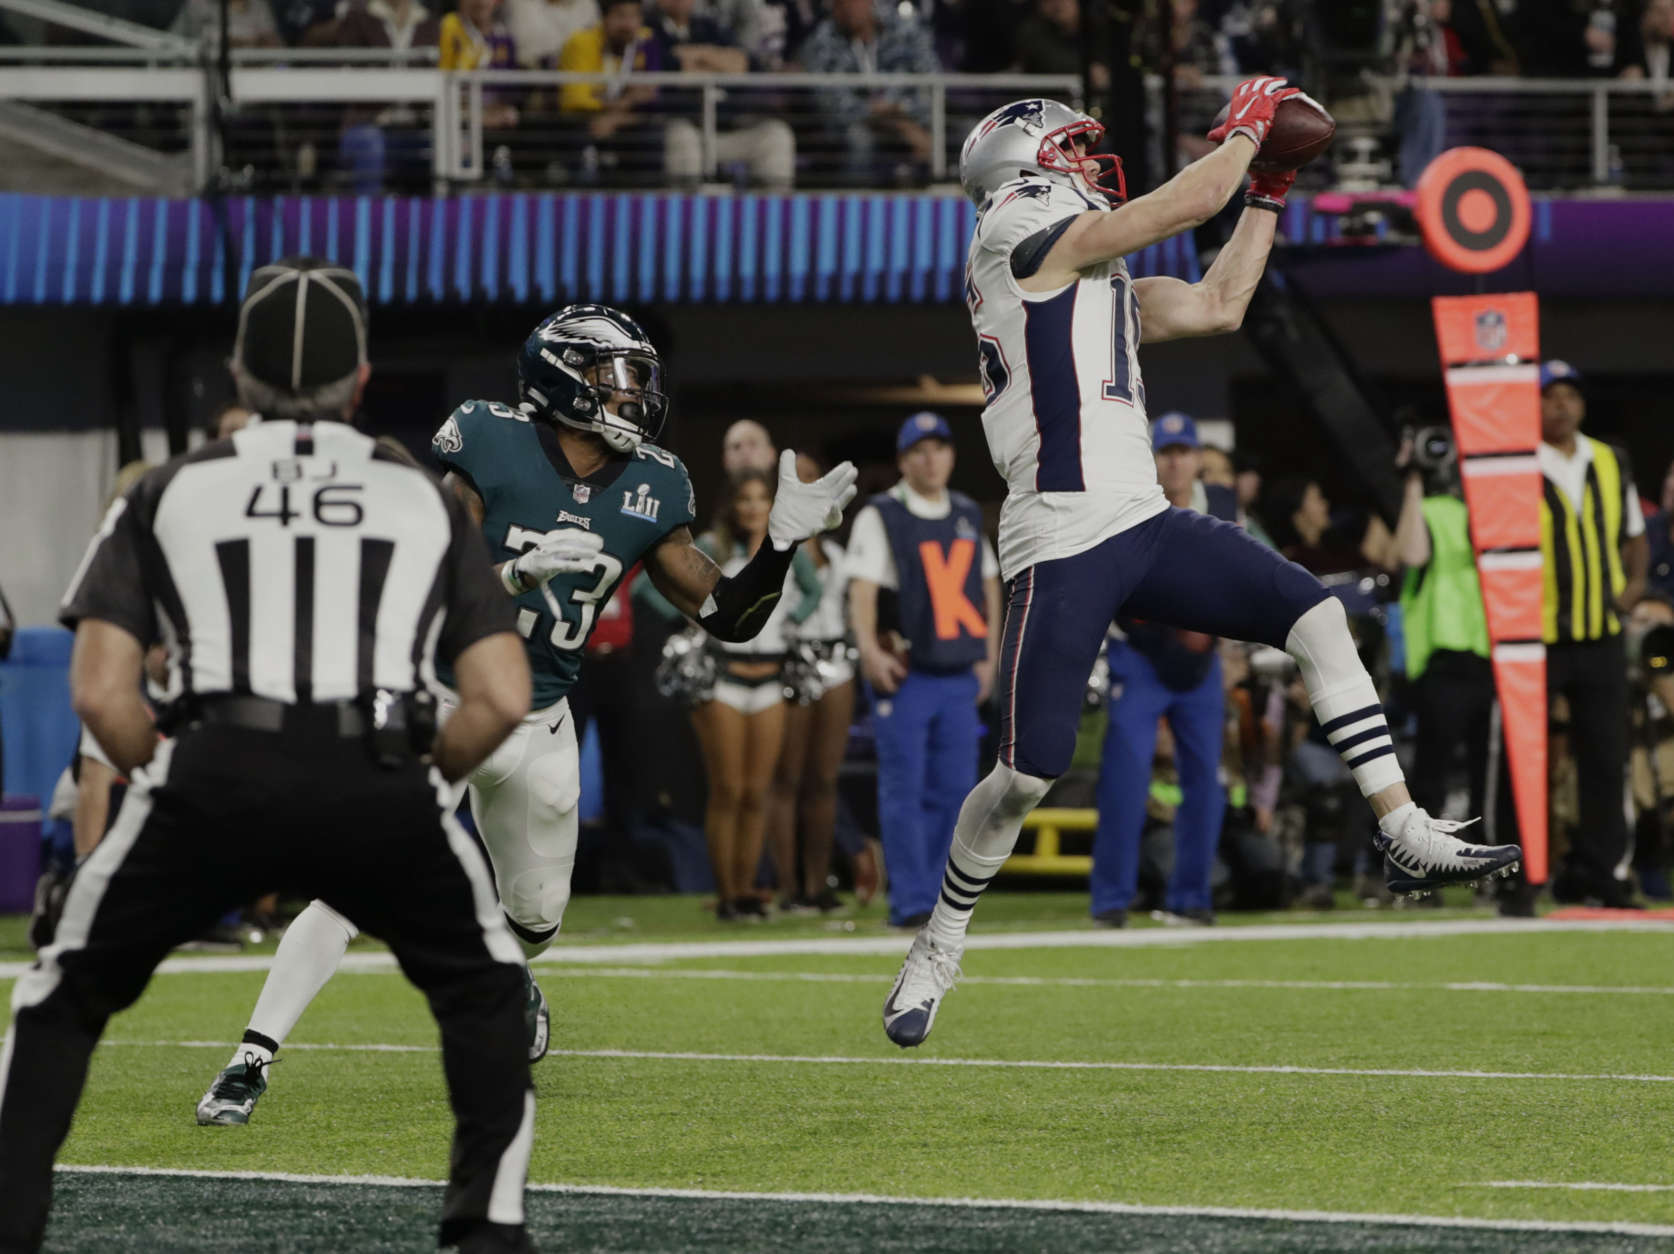 New England Patriots wide receiver Chris Hogan (15) makes a touchdown reception against Philadelphia Eagles free safety Rodney McLeod (23), during the second half of the NFL Super Bowl 52 football game, Sunday, Feb. 4, 2018, in Minneapolis. (AP Photo/Frank Franklin II)